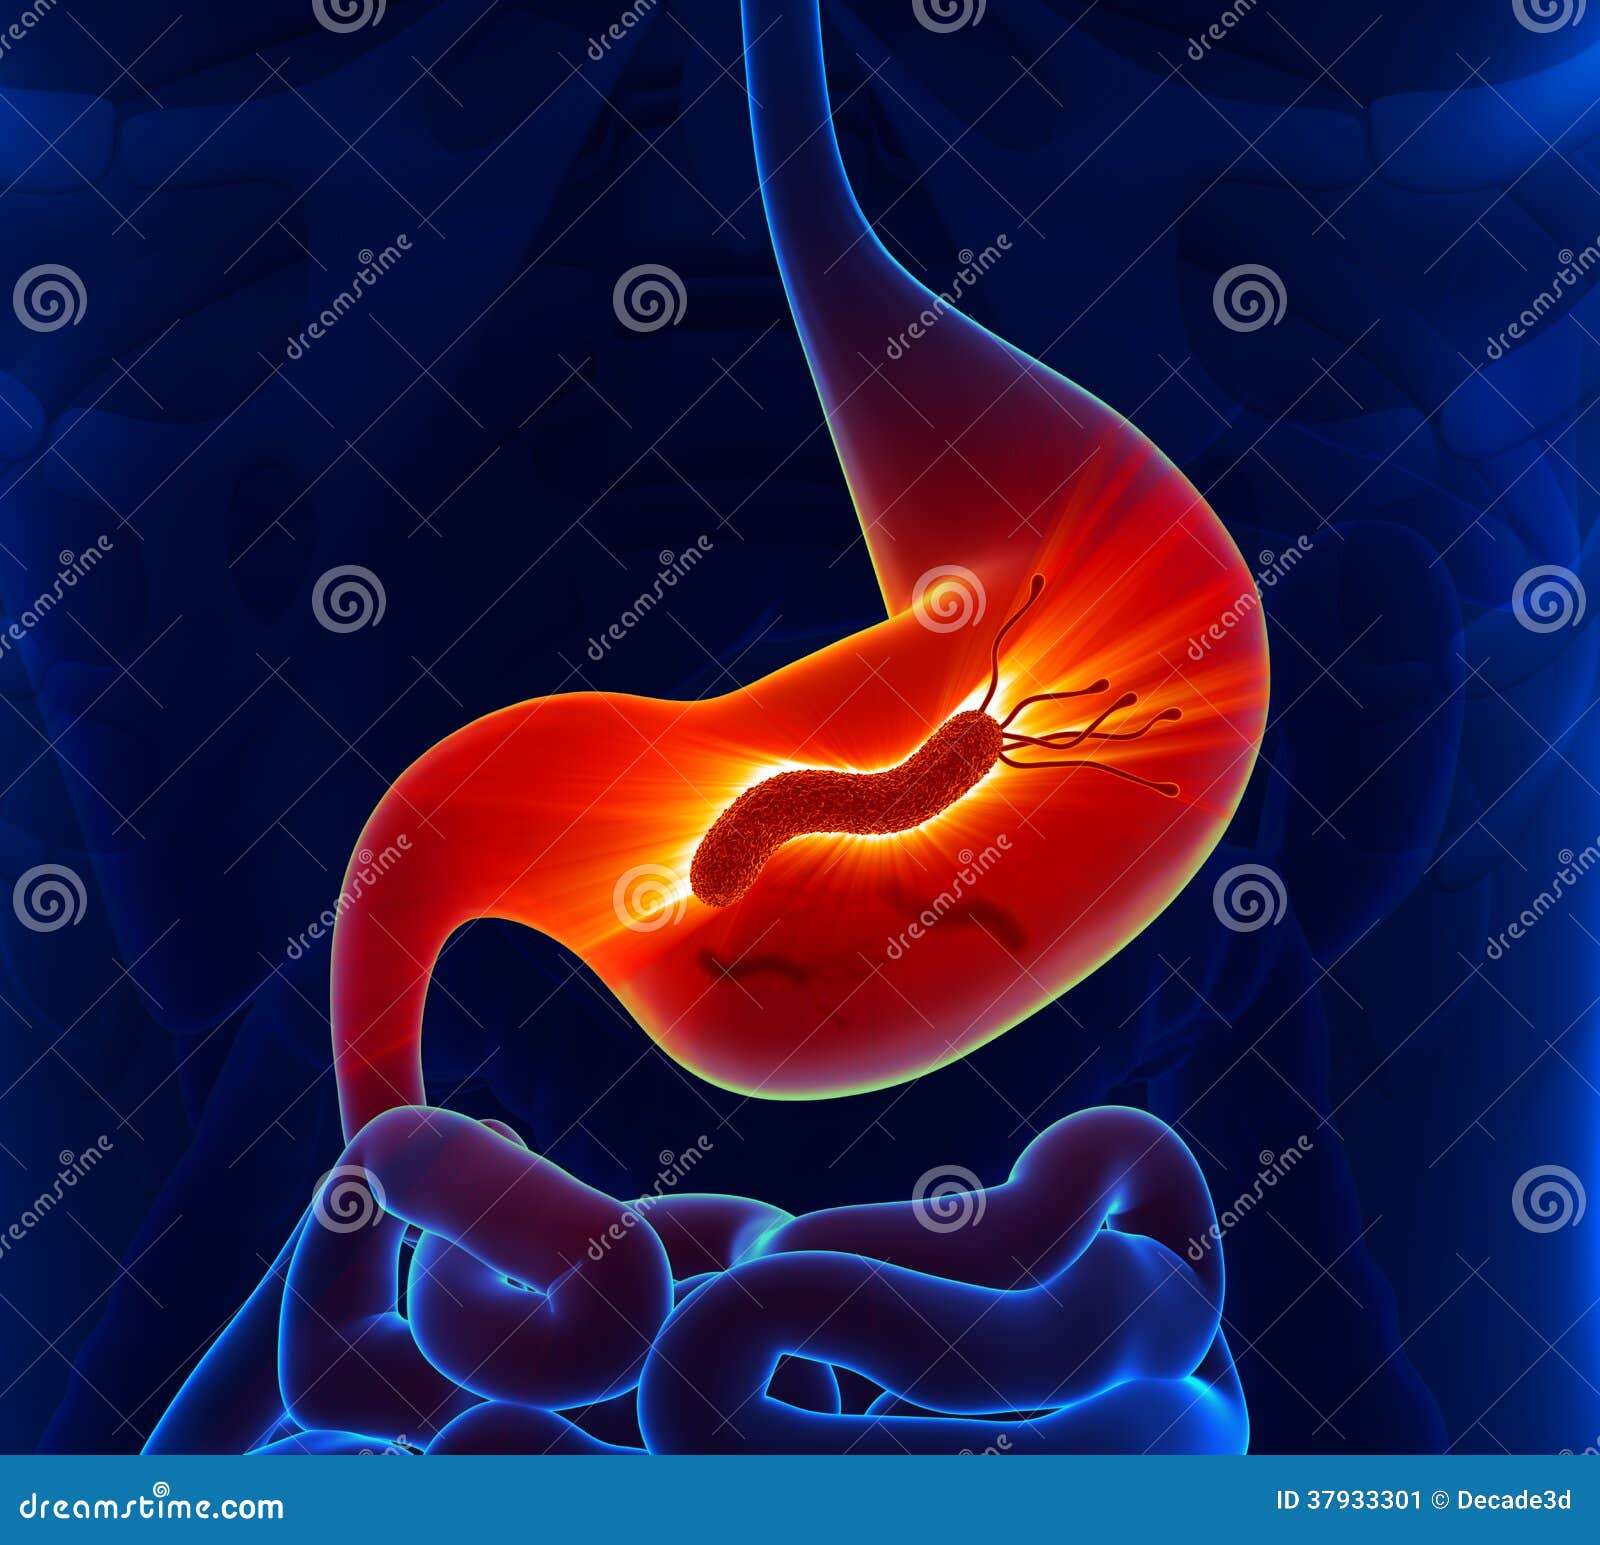 helicobacter pylori - stomach